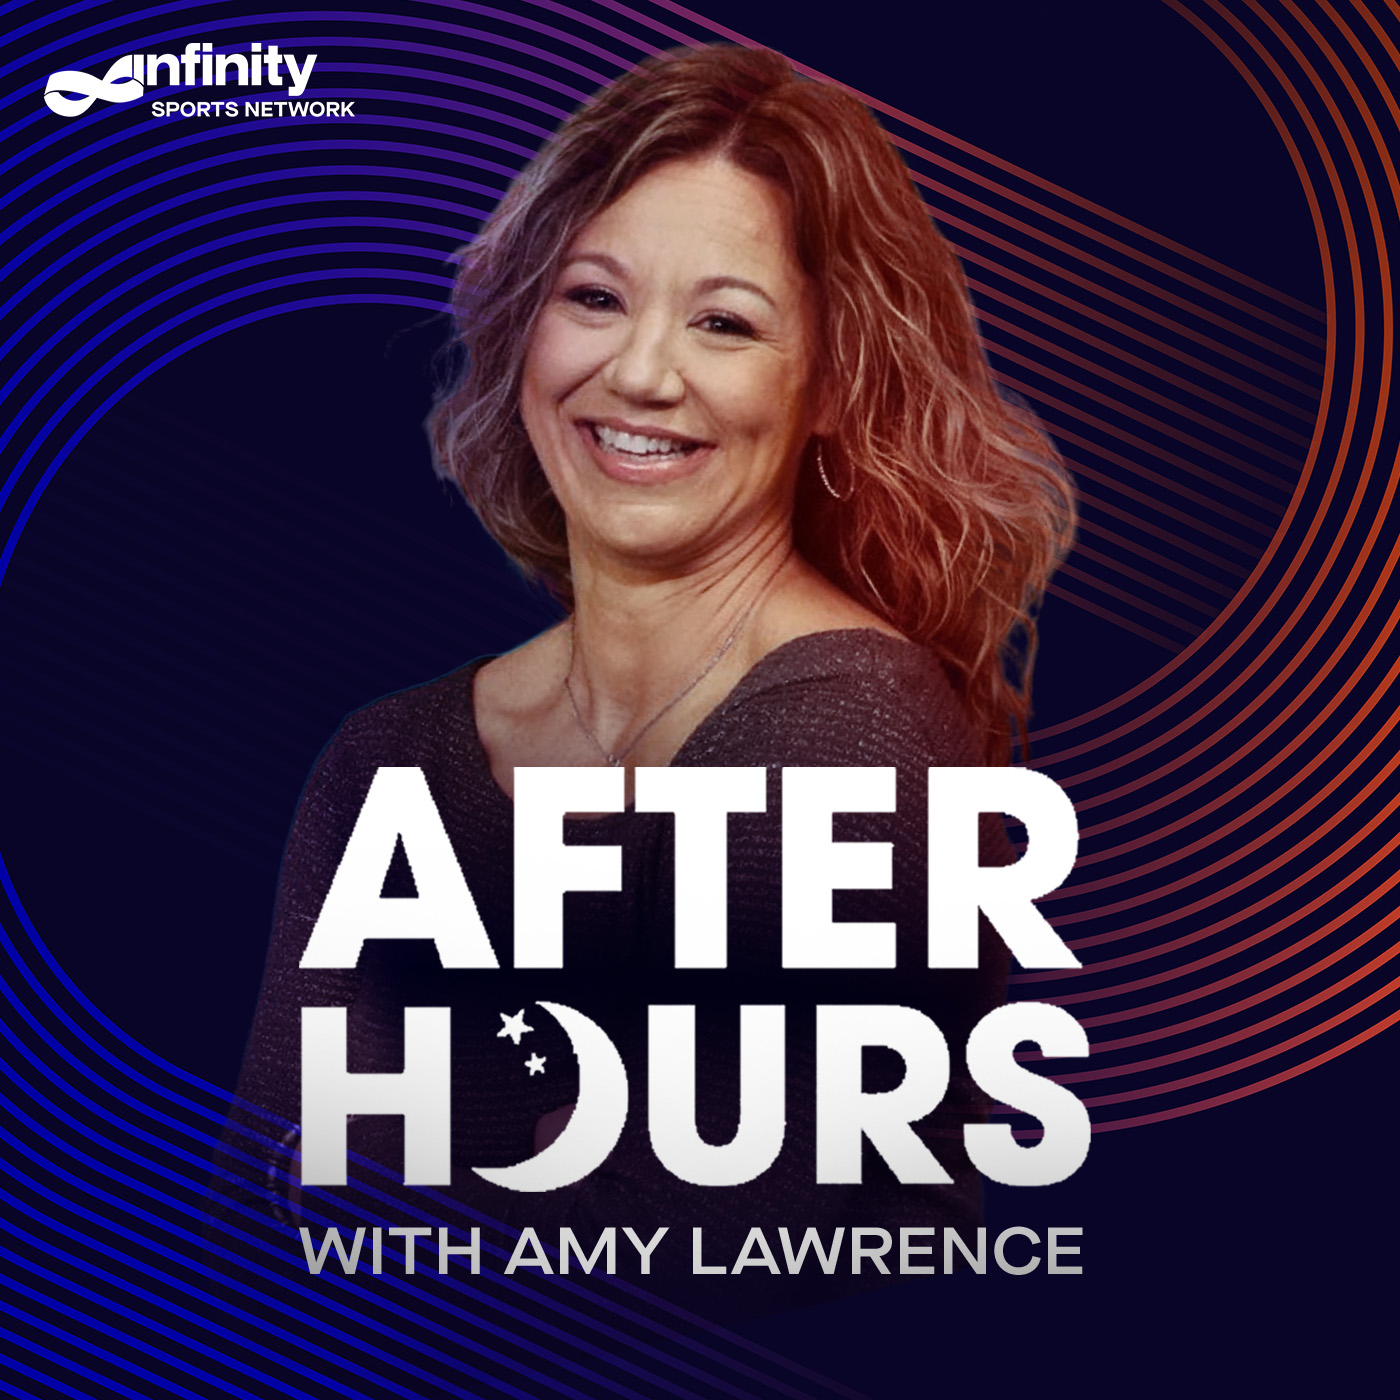 9-8-21 After Hours with Amy Lawrence PODCAST: Hour 3